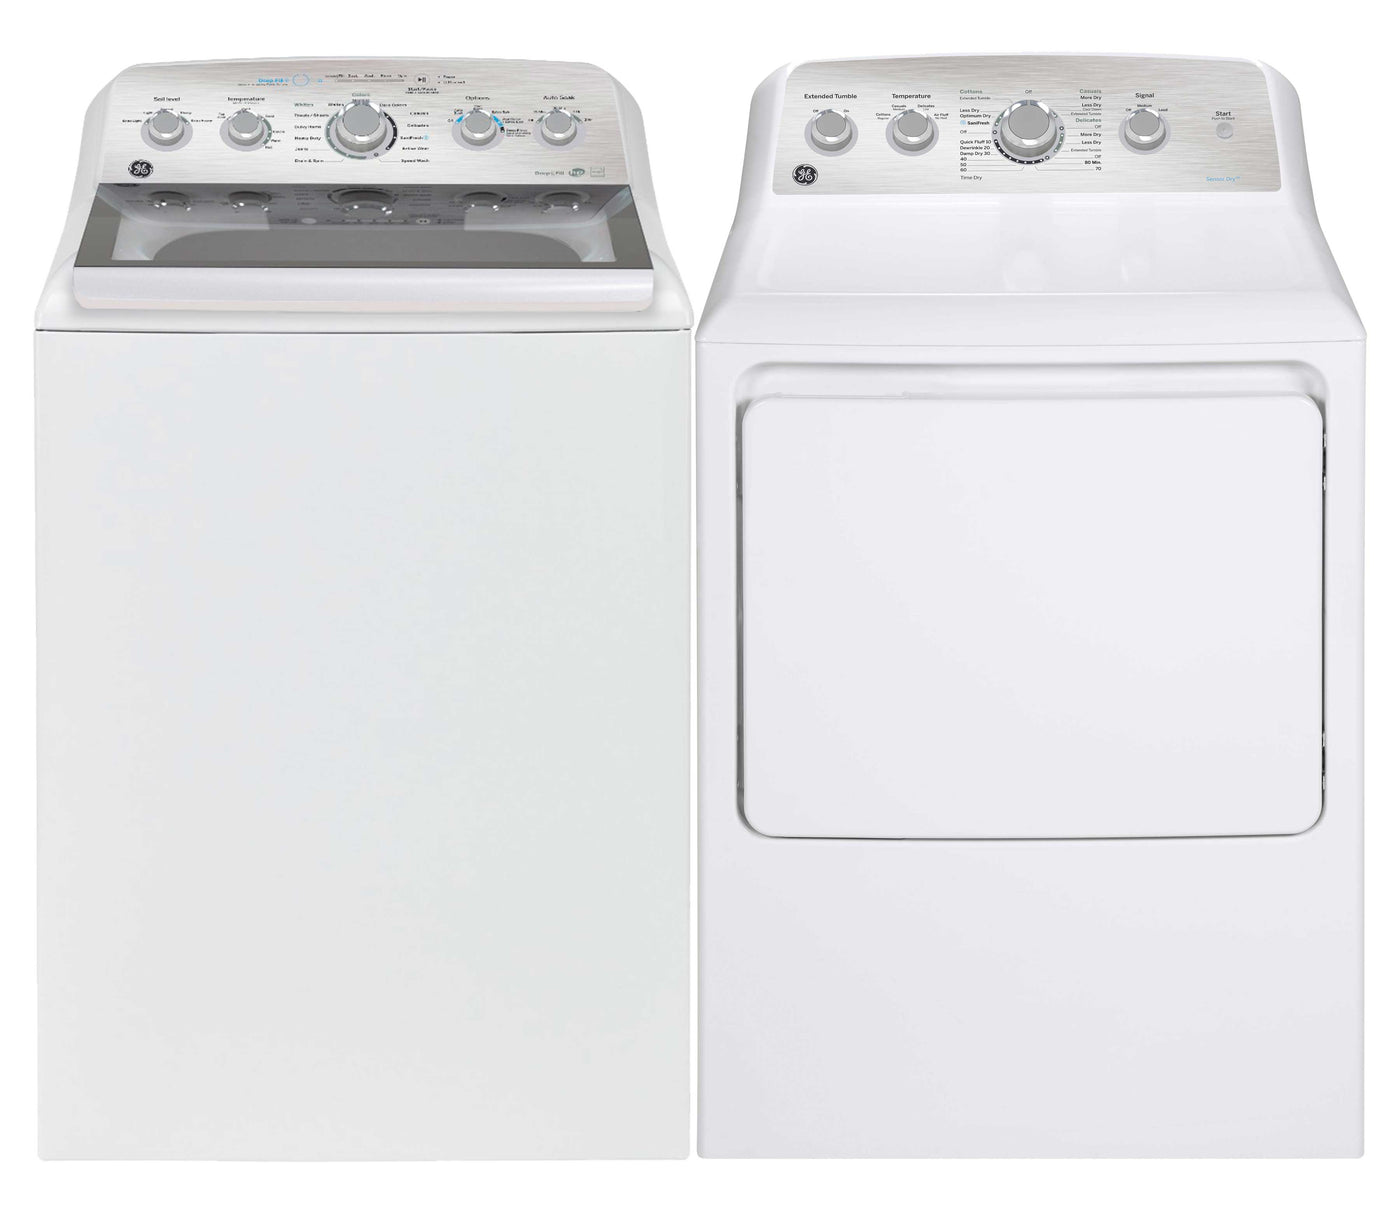 GE White Top-Load Washer (5.0 cu. ft.) & Electric Dryer (7.2 cu. ft.) - GTW580BMRWS/GTD45EBMRWS